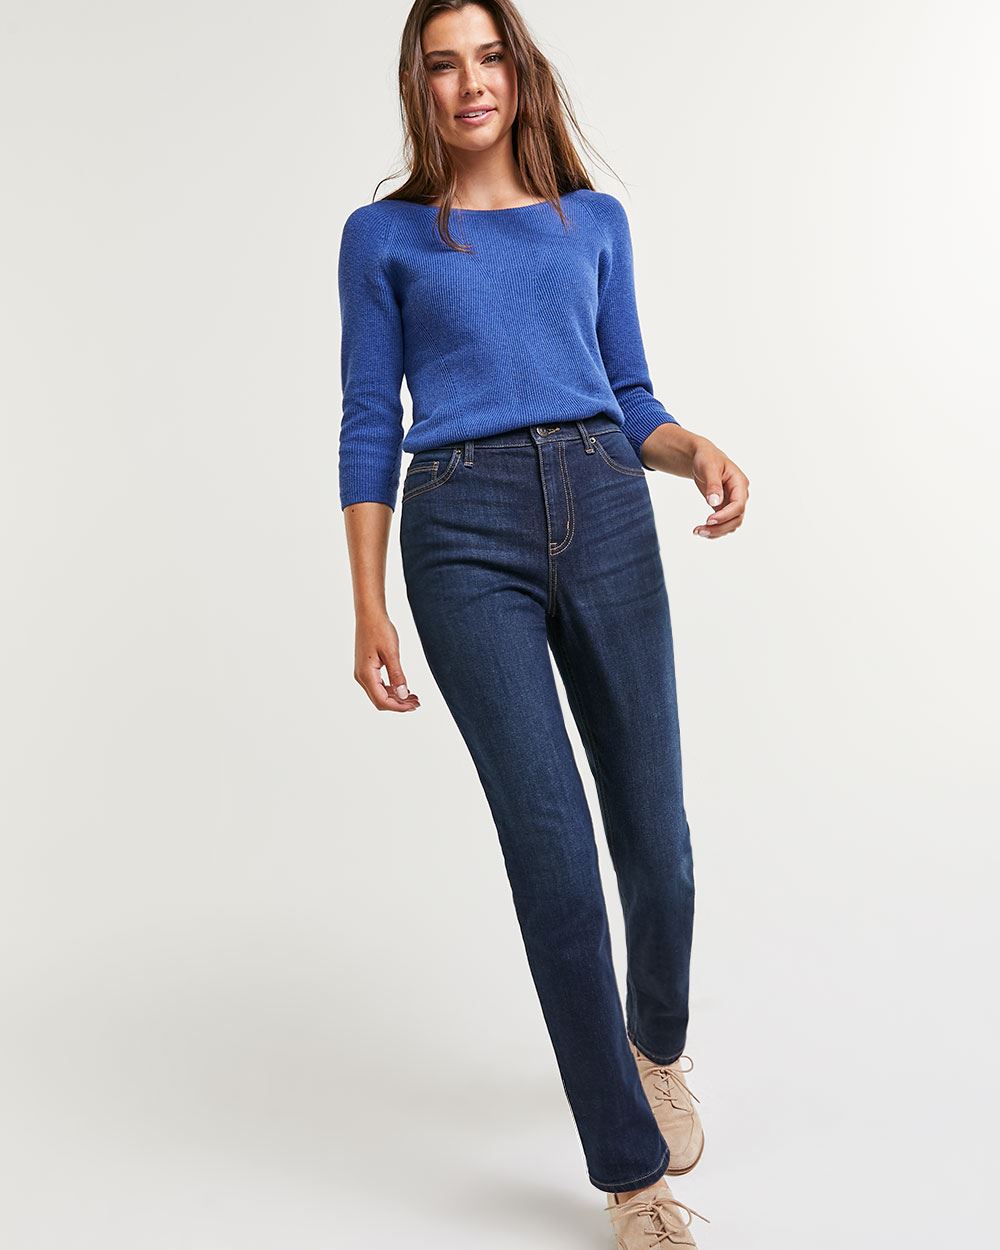 A stock image from Reitmans of a tall thin woman wearing high-waisted dark-blue jeans with a lighter blue 3/4 length top.